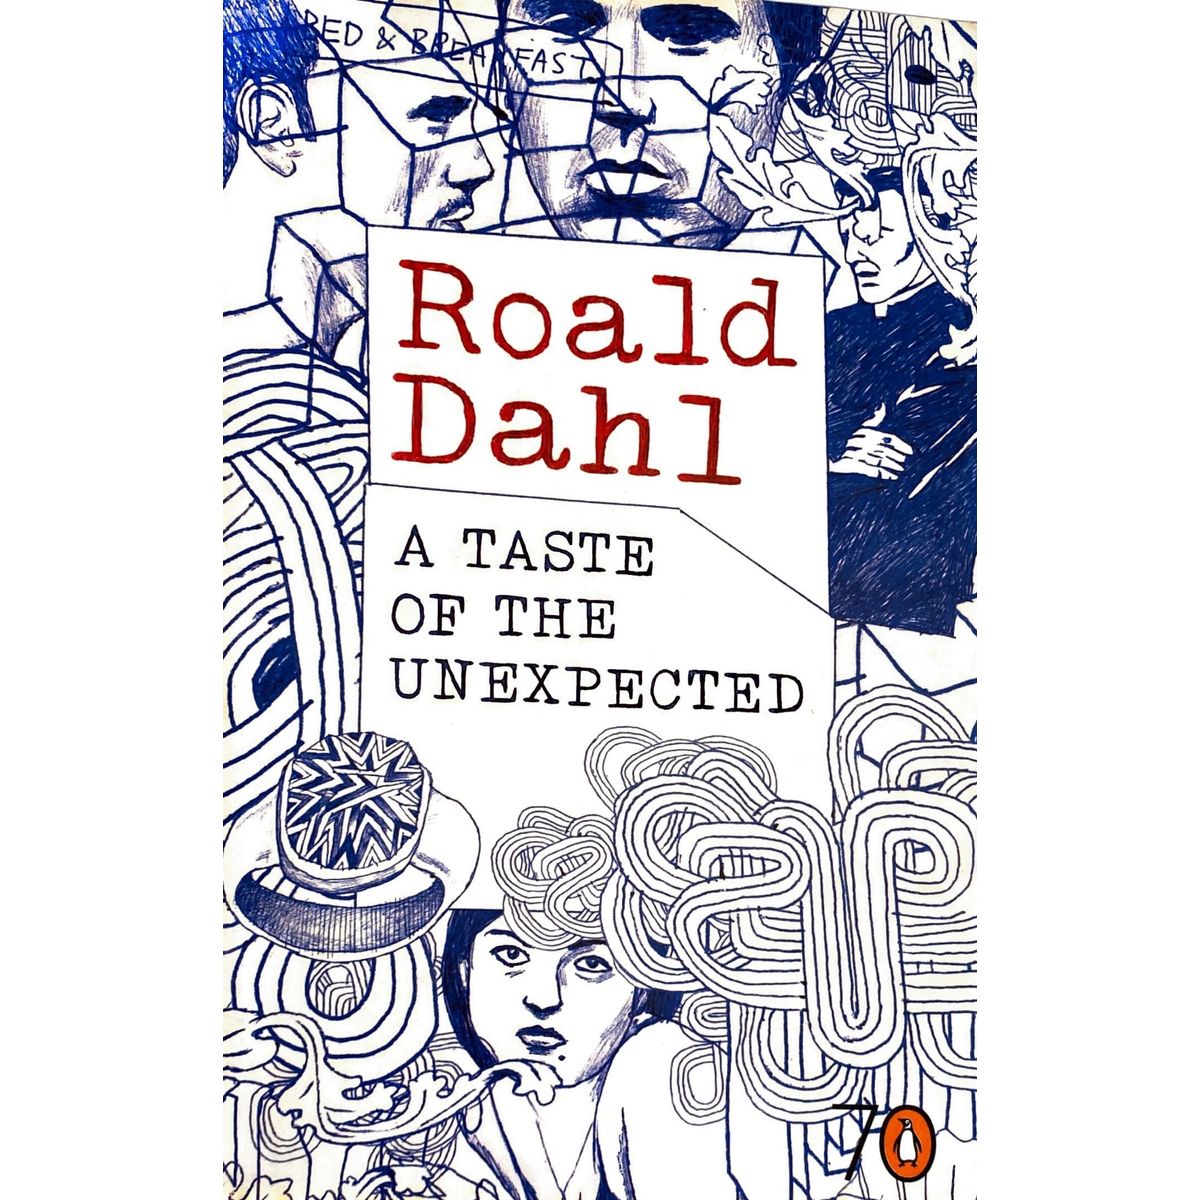 ISBN: 9780141022987 / 0141022981 - A Taste of the Unexpected by Roald Dahl [2005]